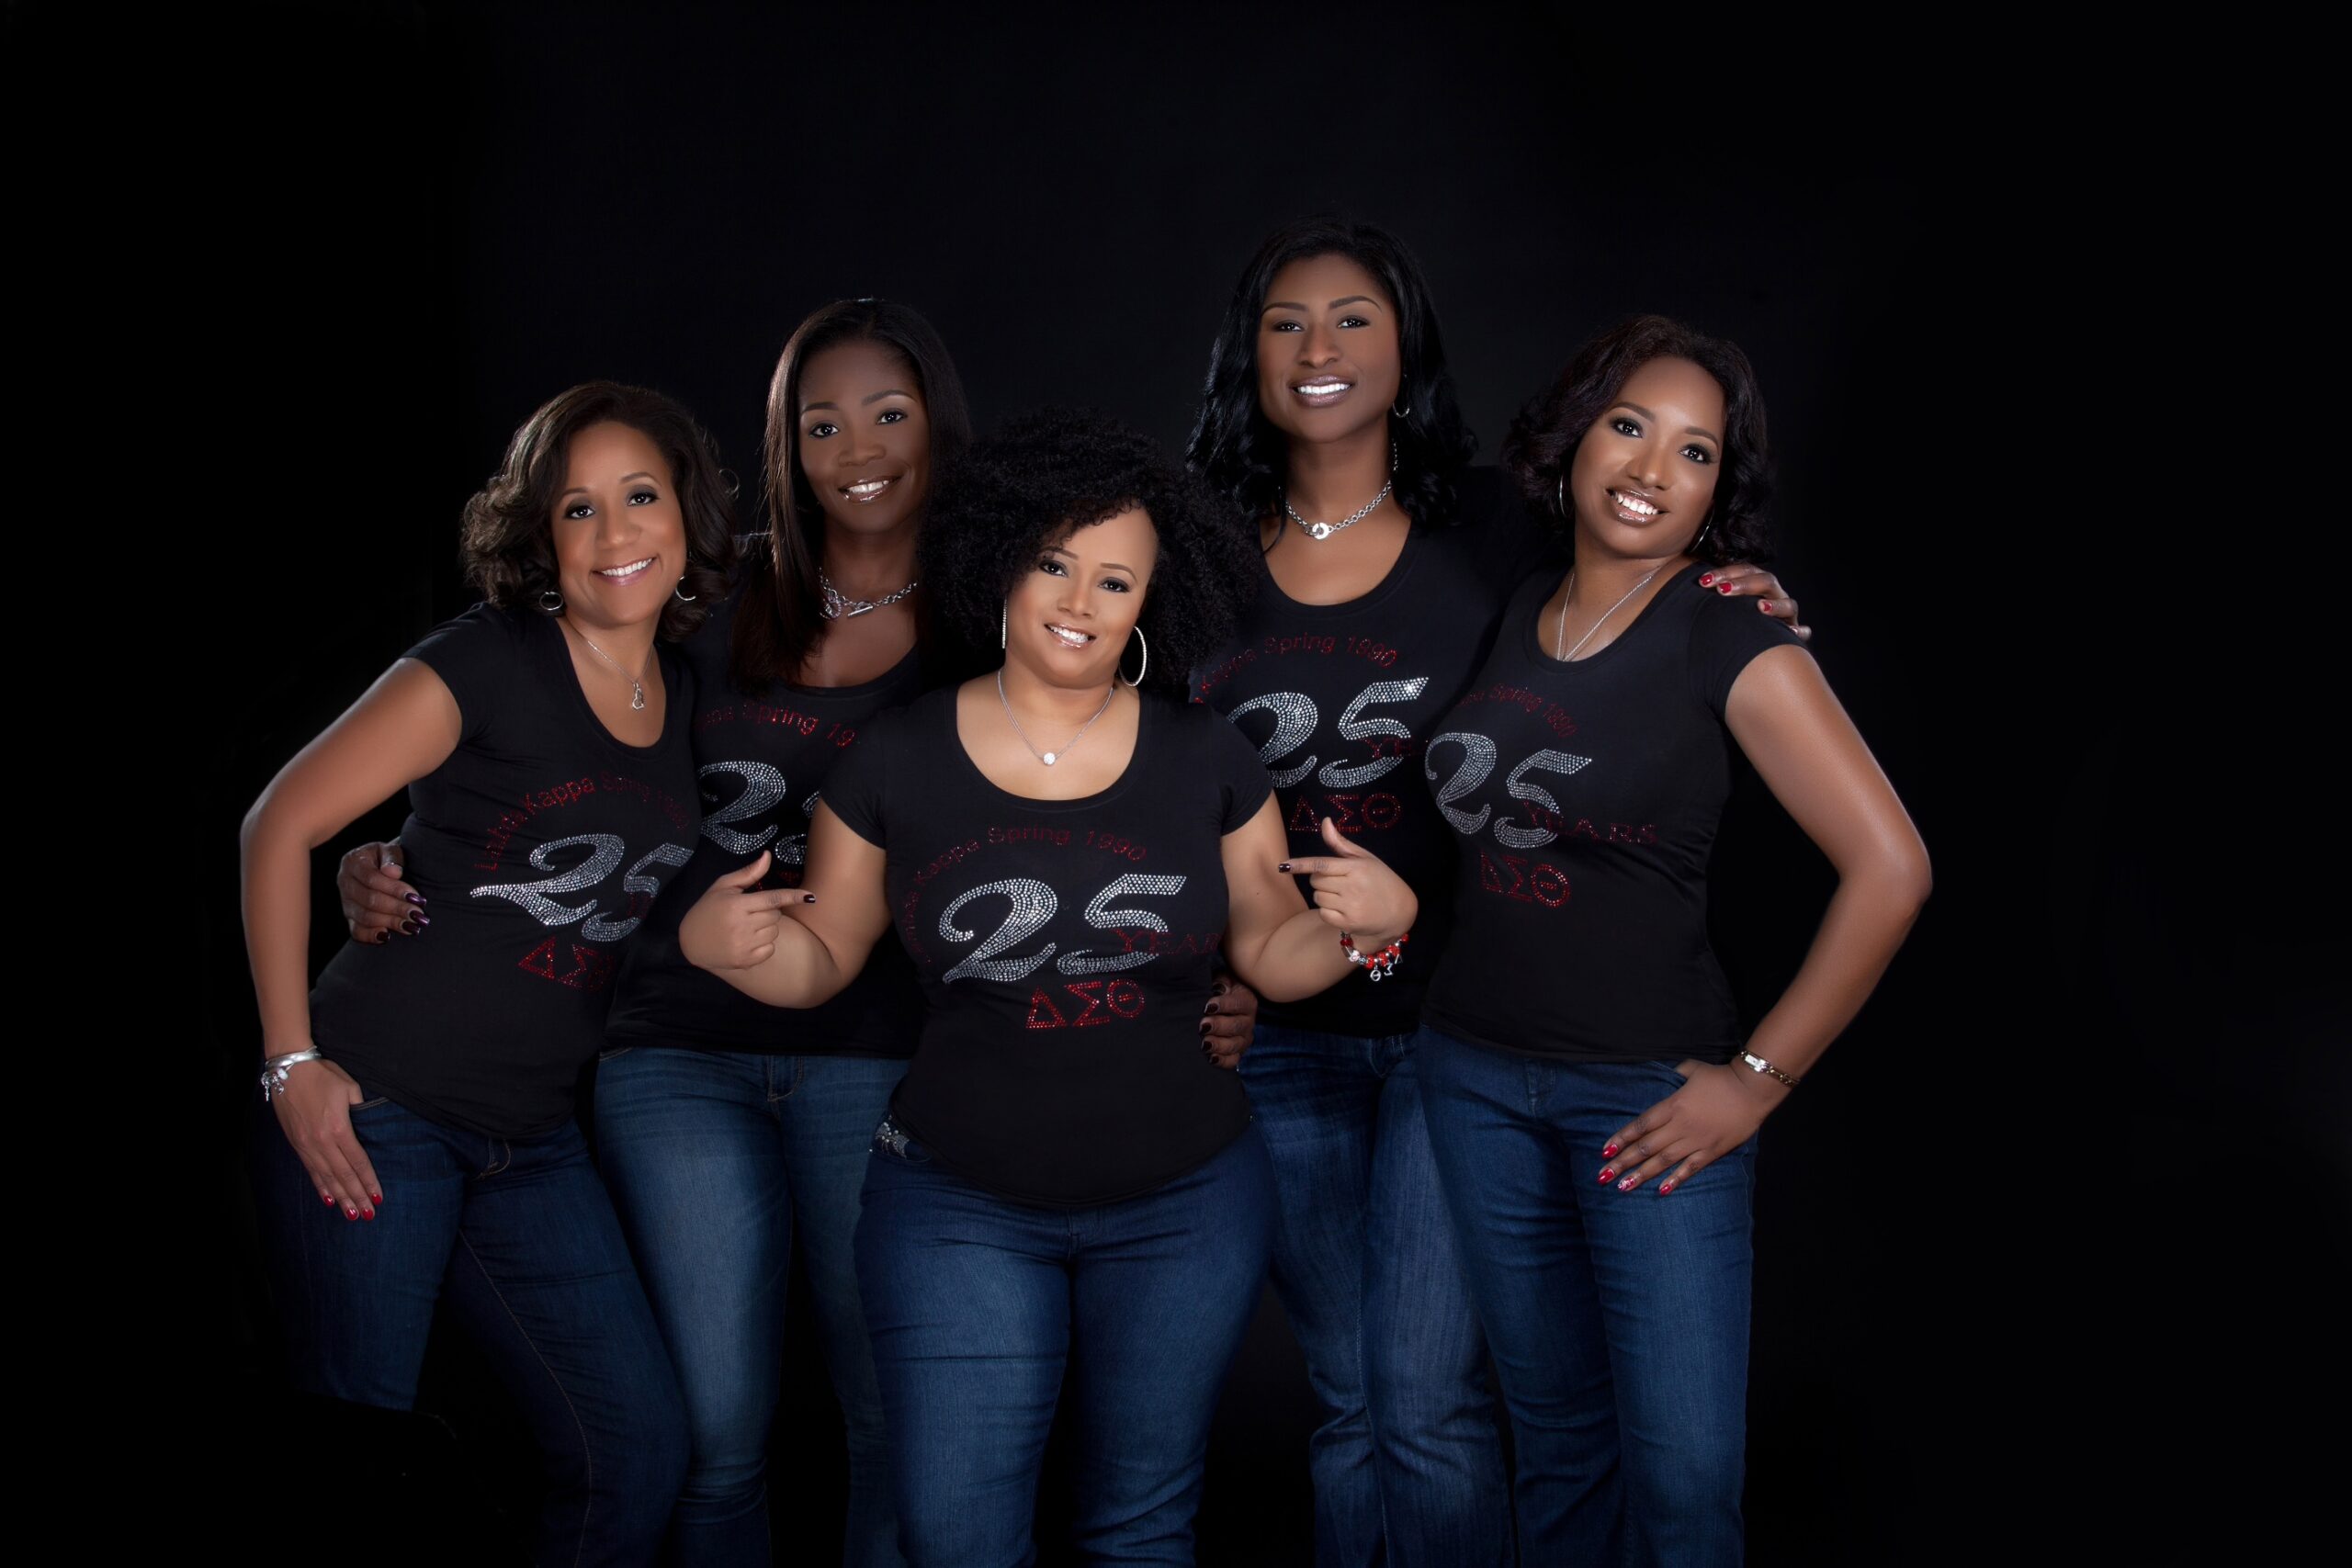 Tracie Cox, Nichole Richmond, Sue Wellington, Anne Wellington Goldsmith, and Monique Cephas celebrating their 25th anniversary of becoming a member of the Lambda Kappa Chapter of Delta Sigma Theta Sorority, Inc.